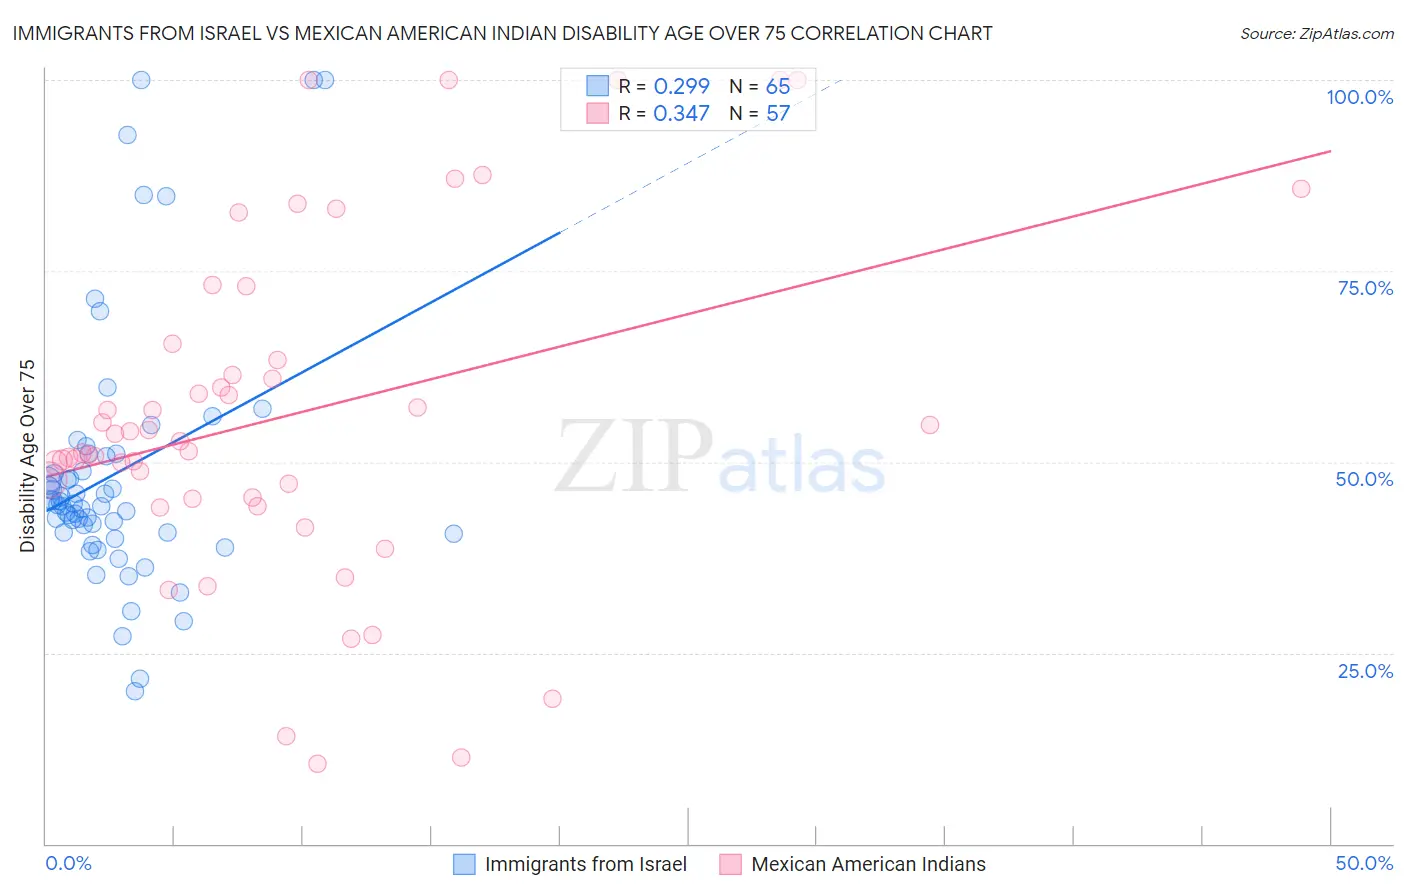 Immigrants from Israel vs Mexican American Indian Disability Age Over 75